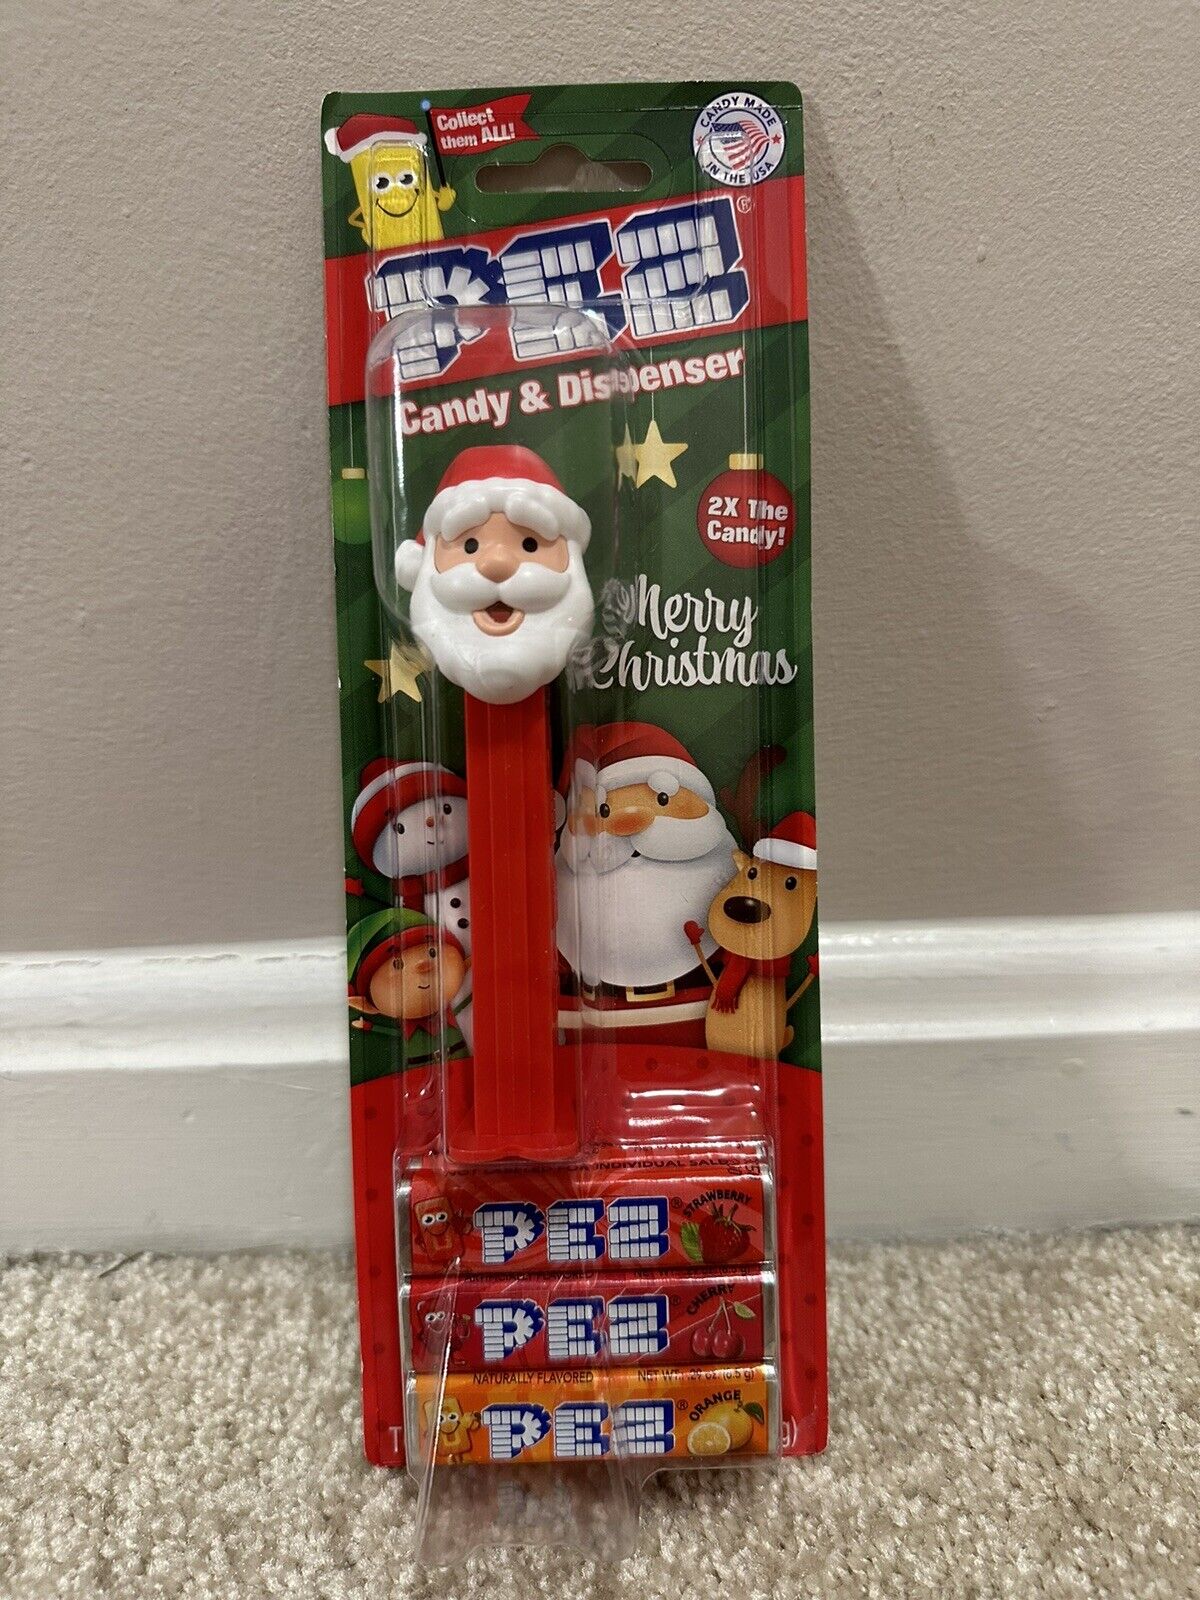 Santa Claus Pez Dispenser with 2x The Candy Made in USA - Brand New Christmas